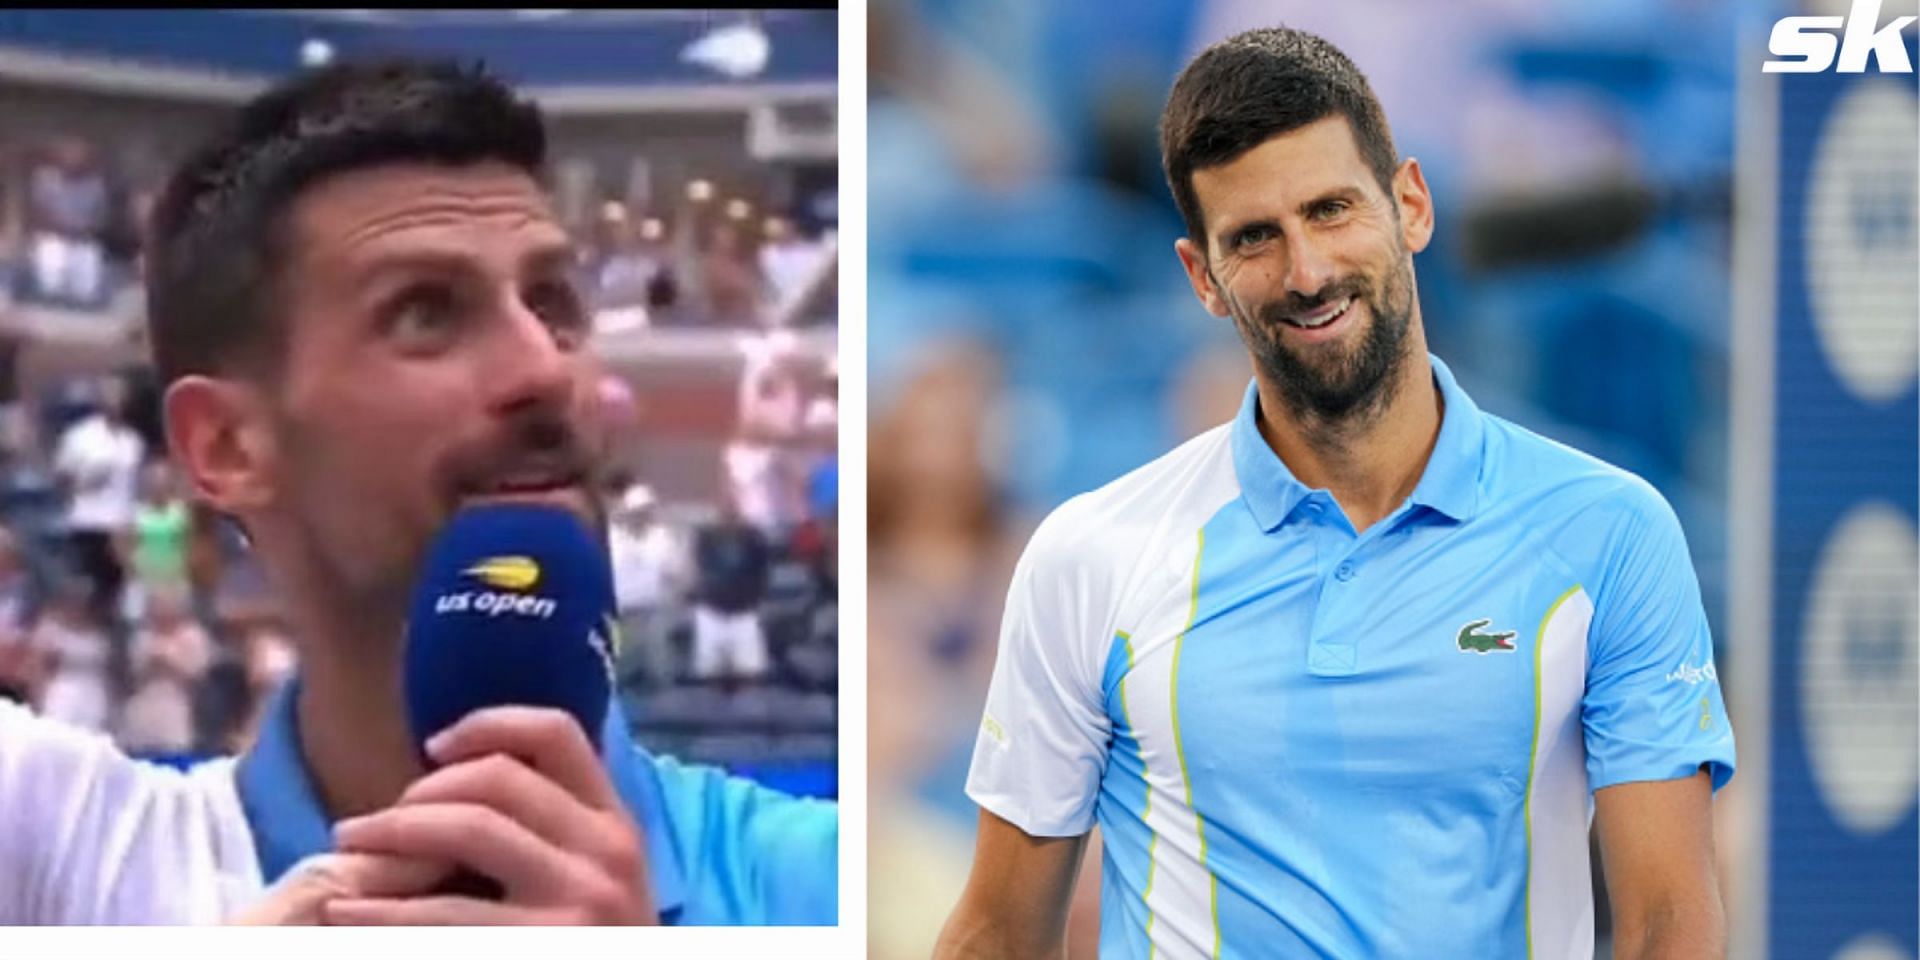 Novak Djokovic reacts to the hilarious remix of his rendition of Beastie Boys Fight For Your Right made by DJ Giuseppe Ottaviani